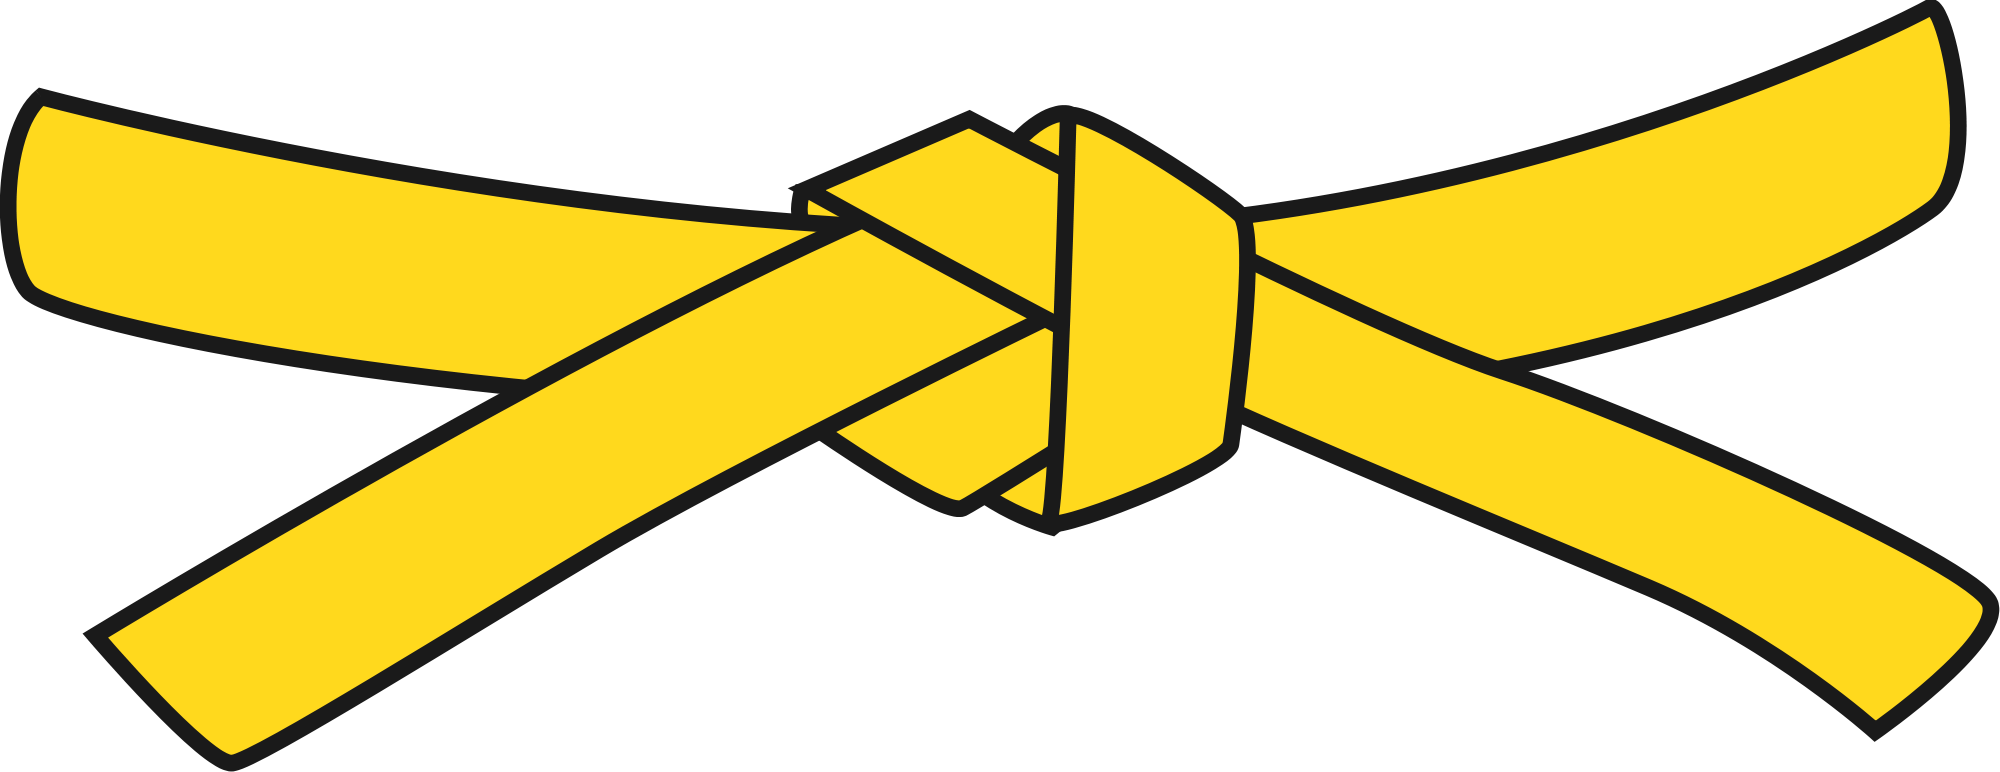 A Yellow Ribbon Tied To A Black Background